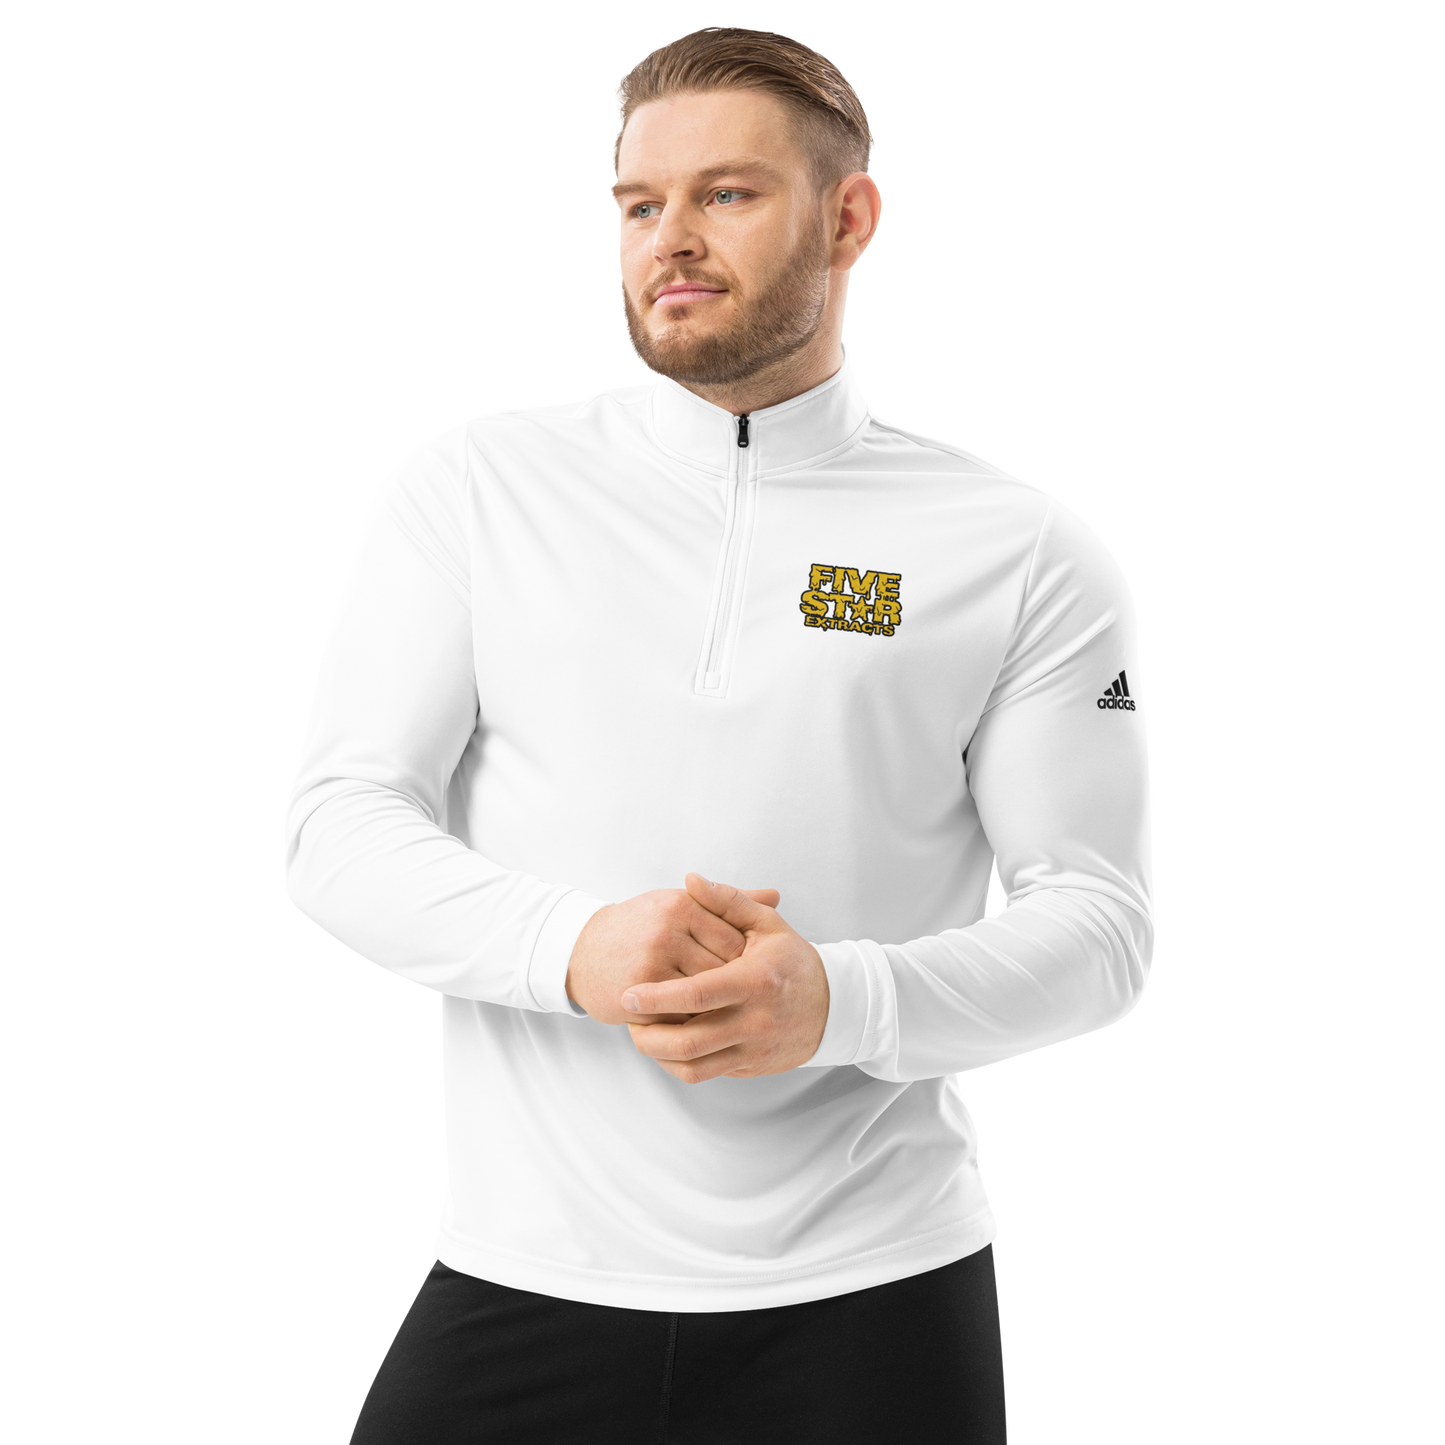 Five Star Extracts - Adidas Quarter zip pullover